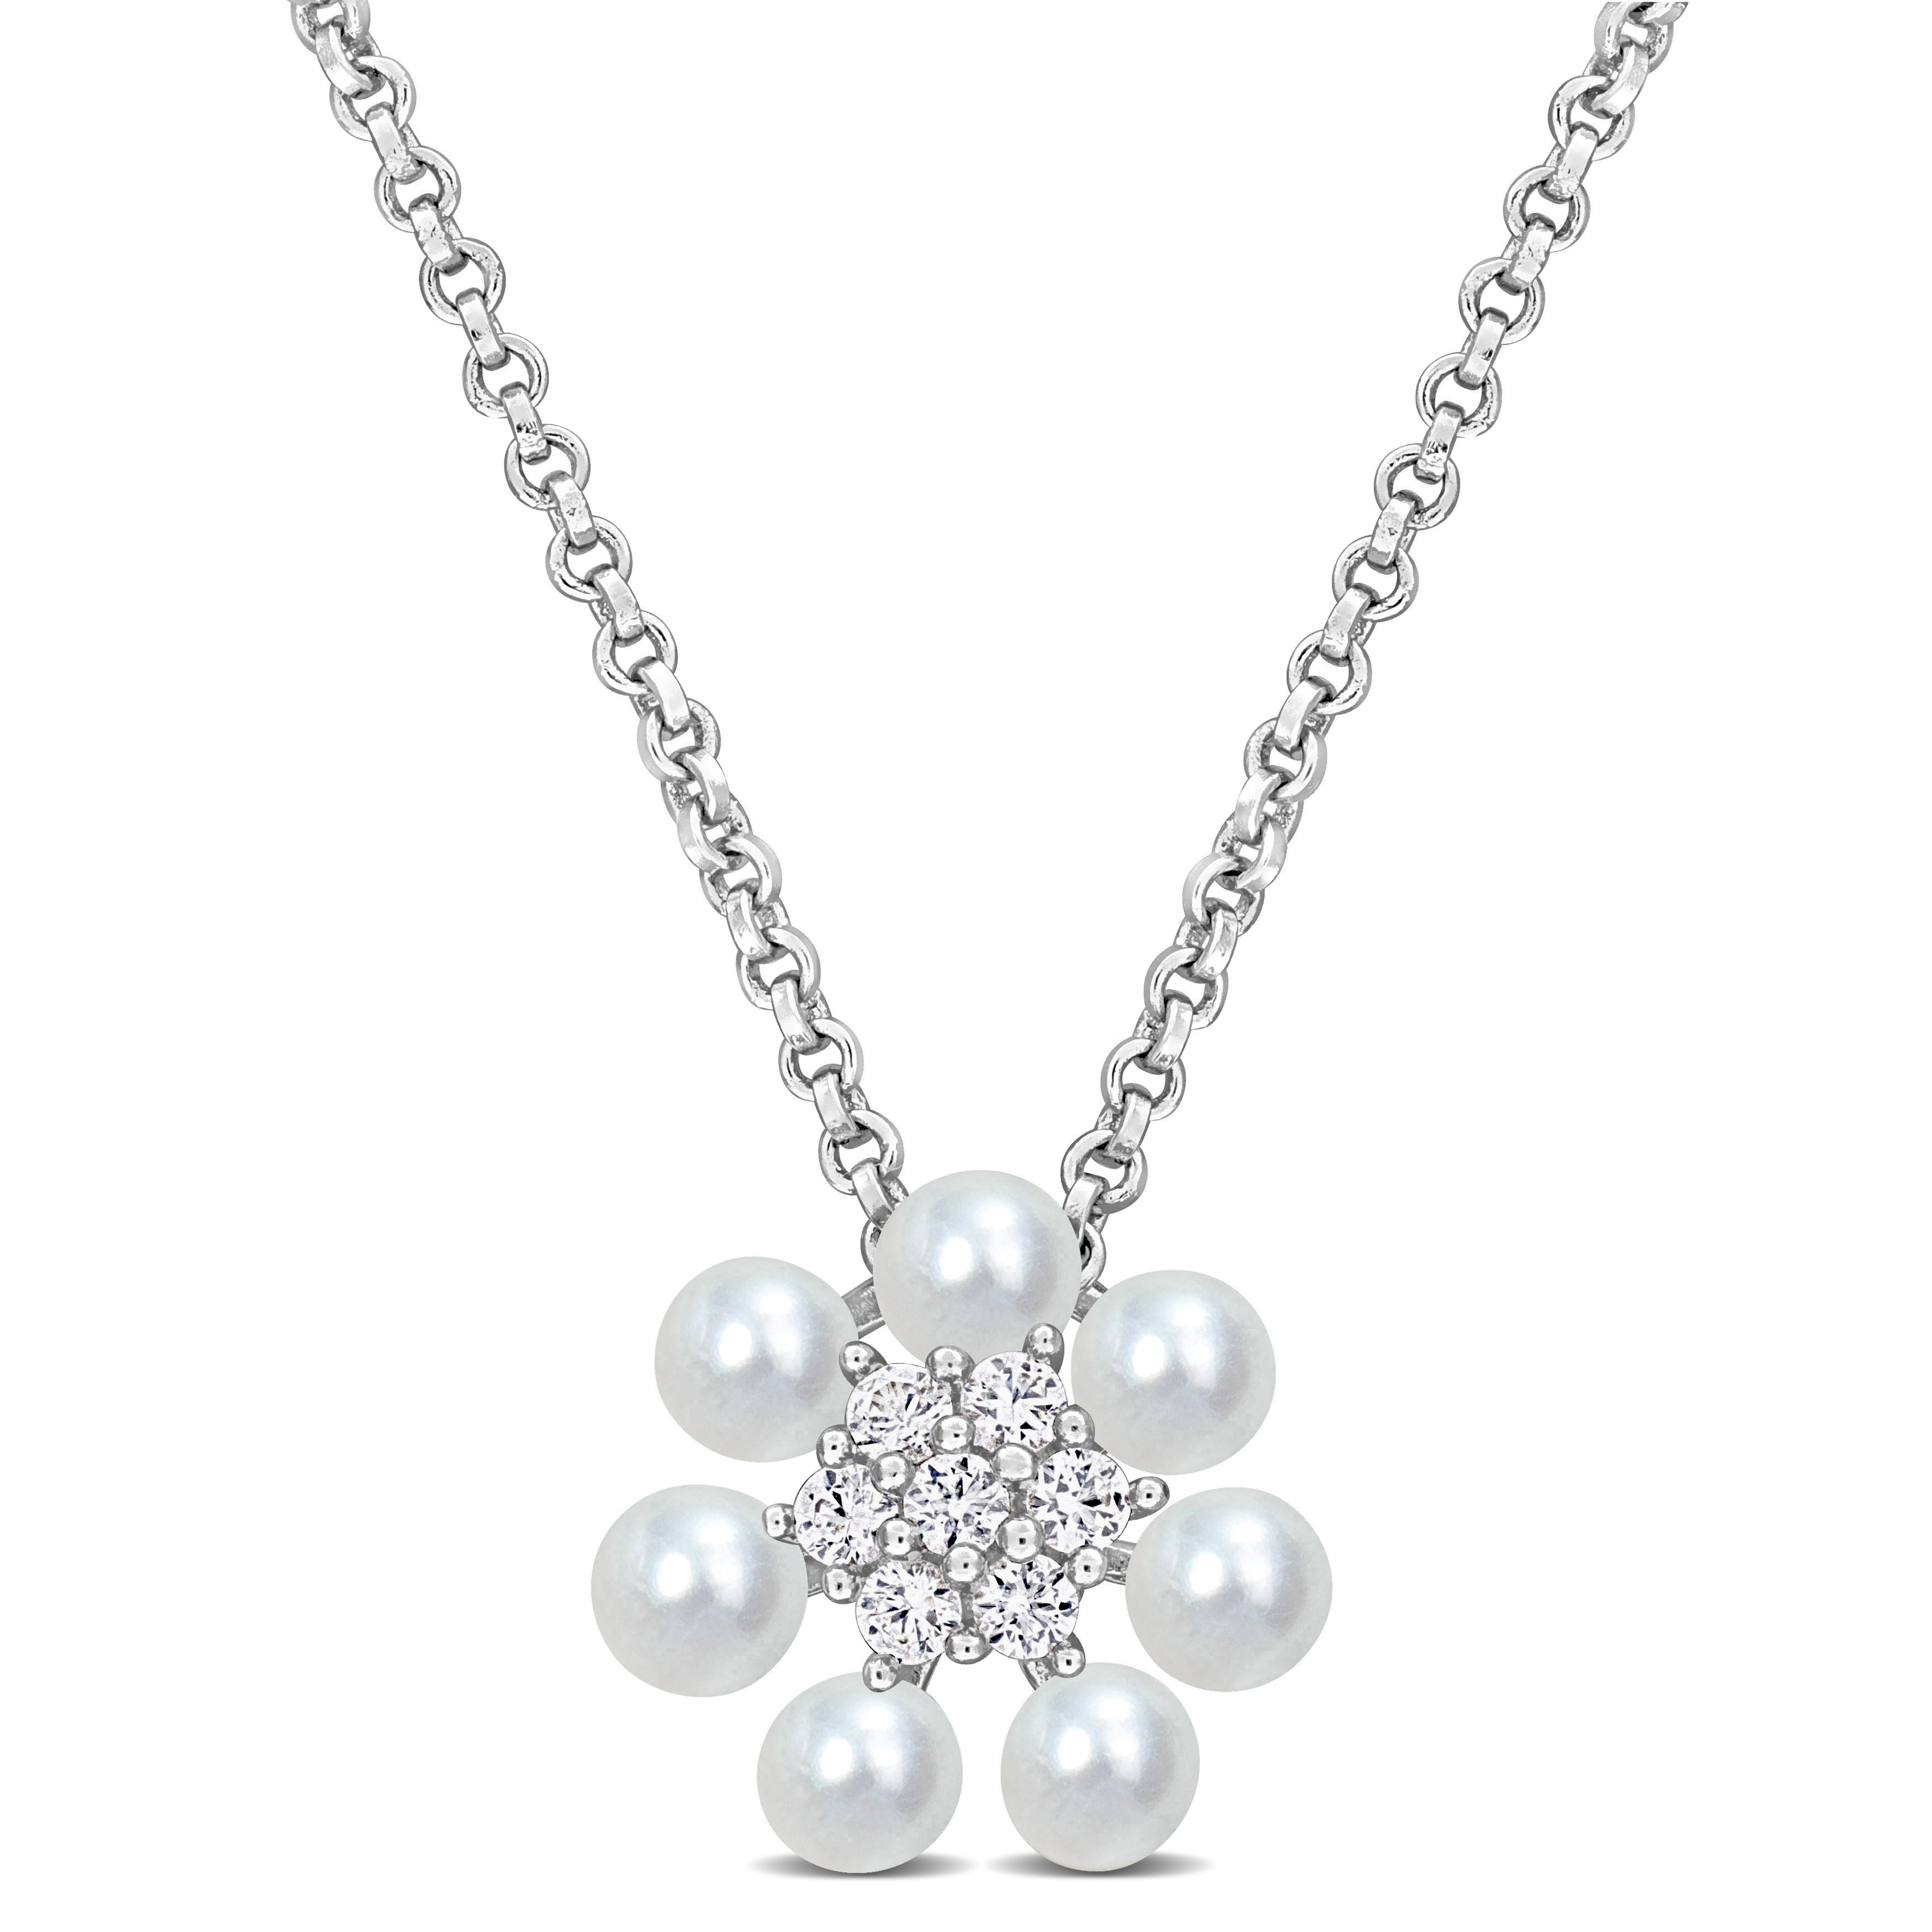 3-3.5 MM Freshwater Cultured Pearl and 1/7 CT TGW Created White Sapphire Flower Cluster Pendant with Chain in Sterling Silver - 18 in.